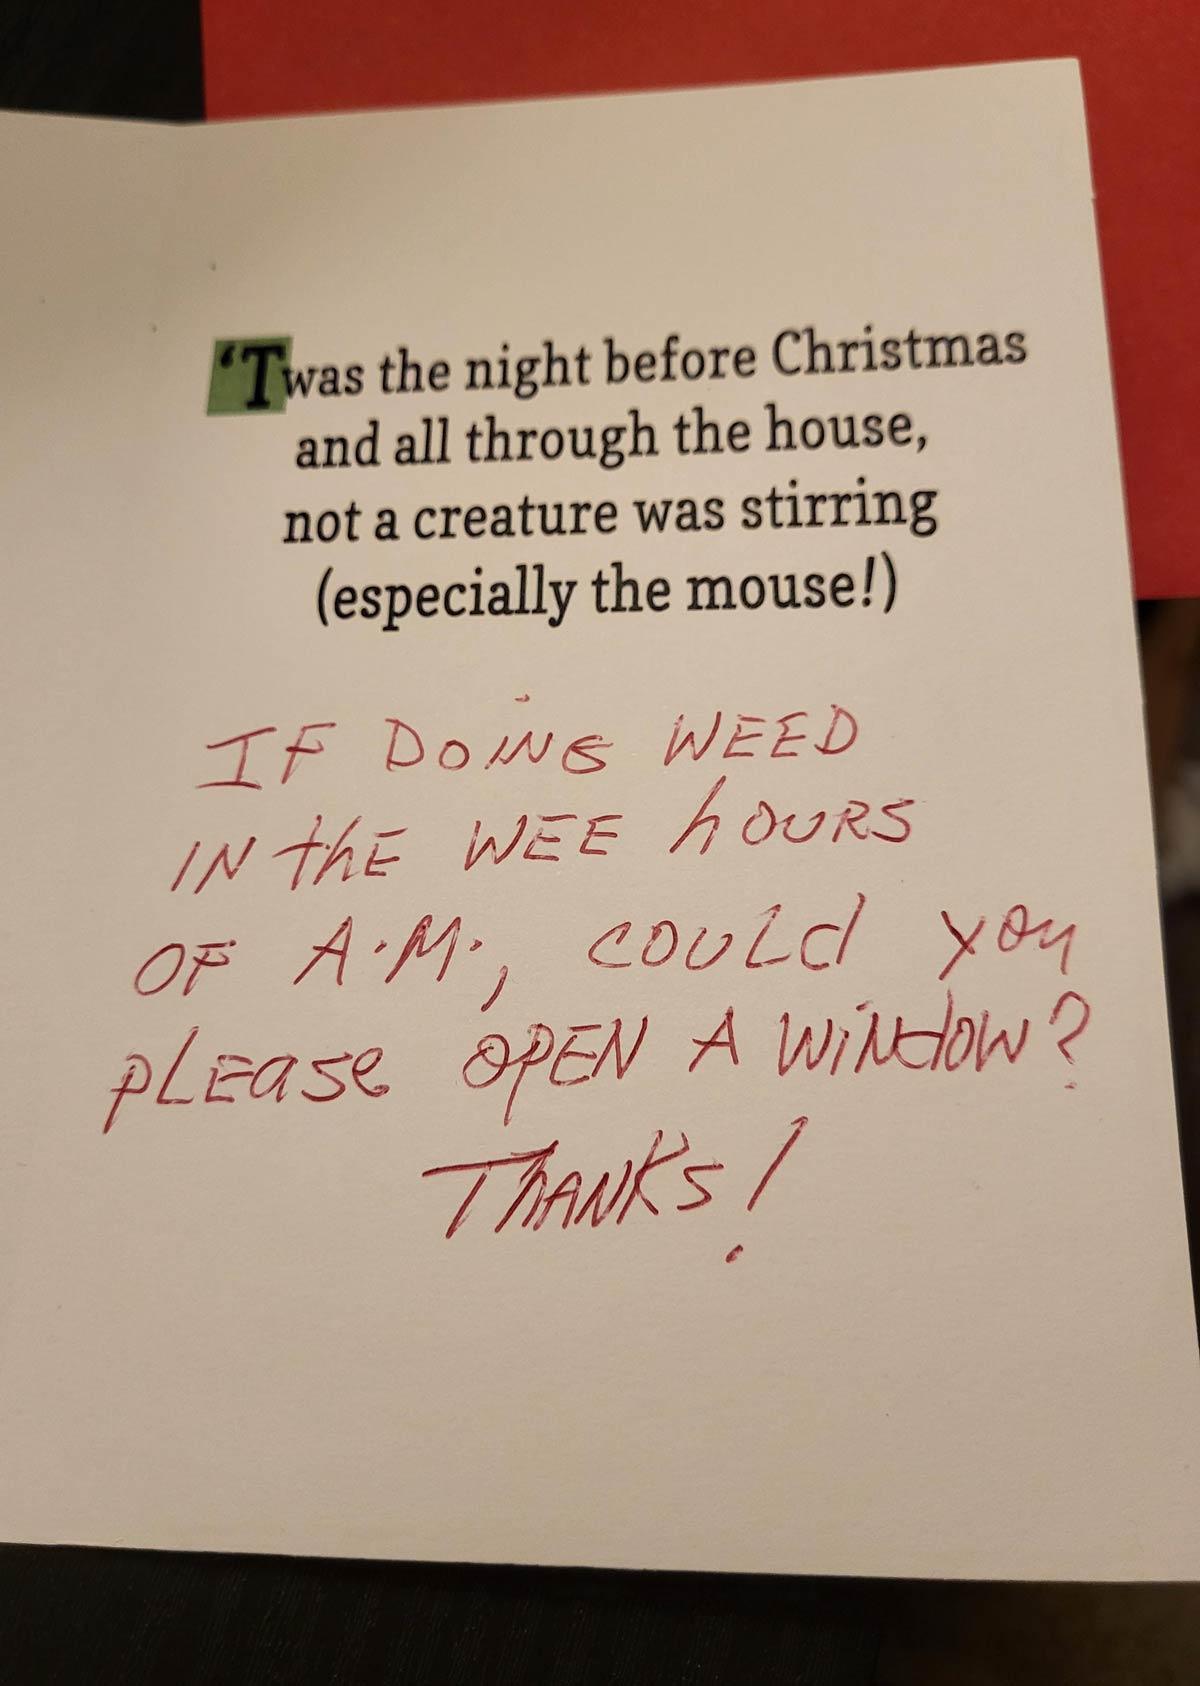 Got a thoughtful Christmas card from one of my neighbors (I don't smoke)